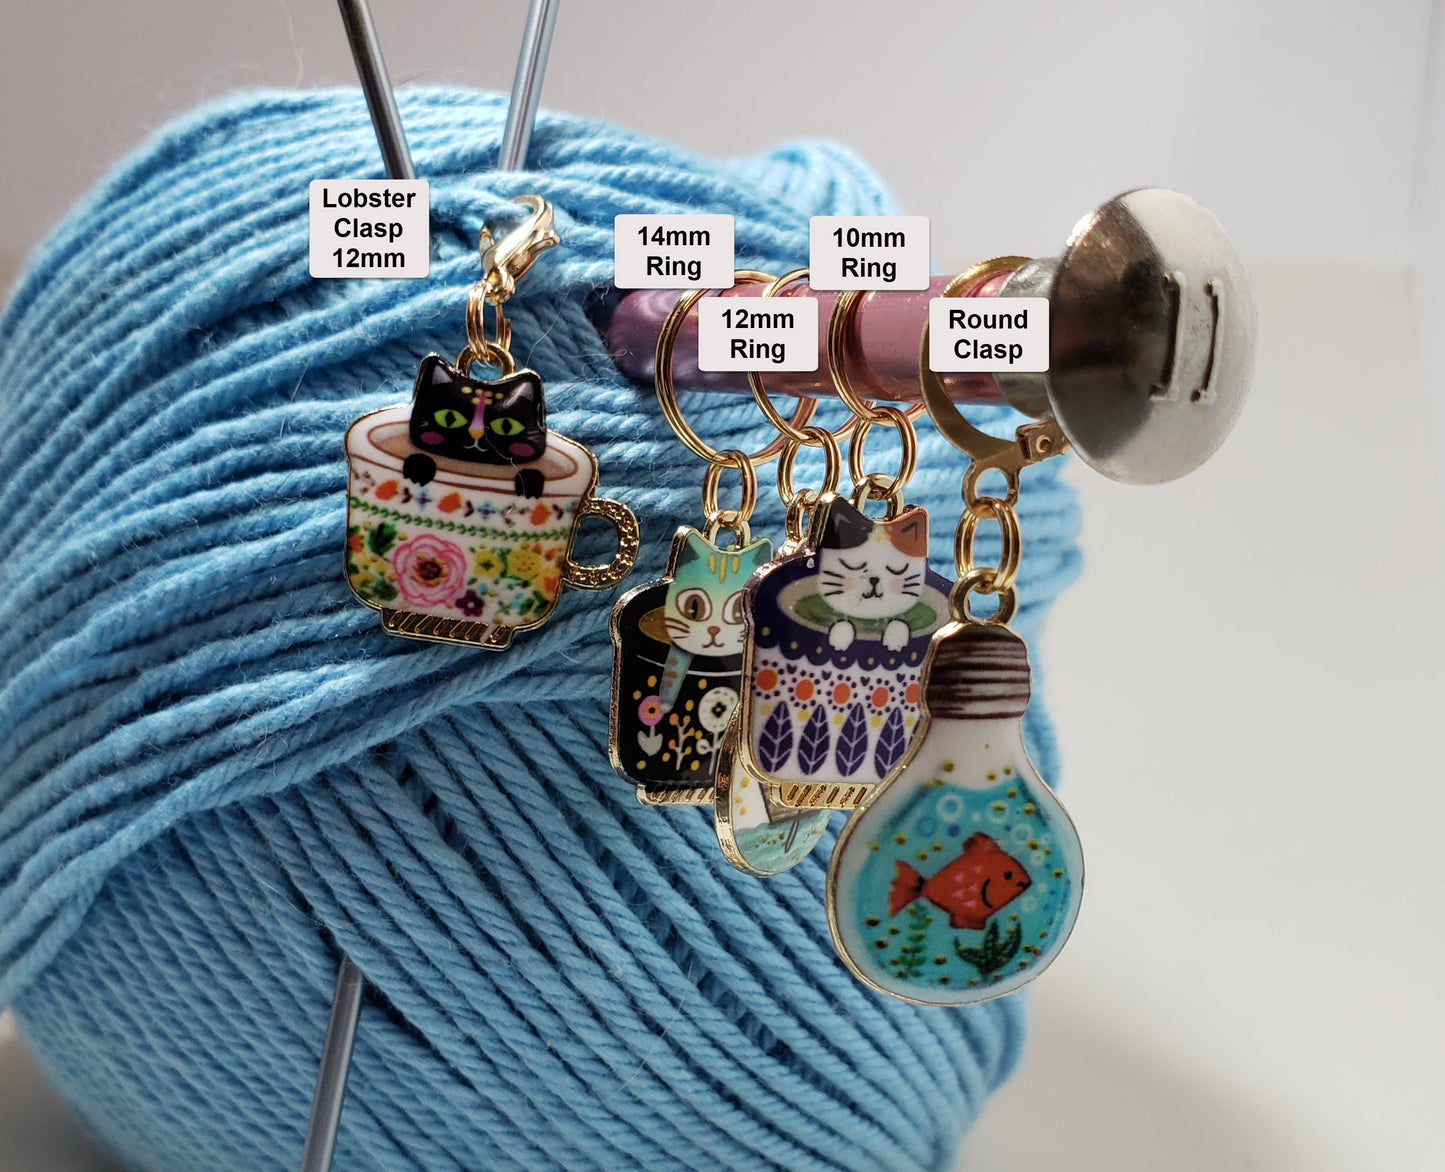 Stitch Markers for Knitting, 3 pc Tea for Two | Crochet stitch marker, progress keeper, project bag charms, crochet accessory